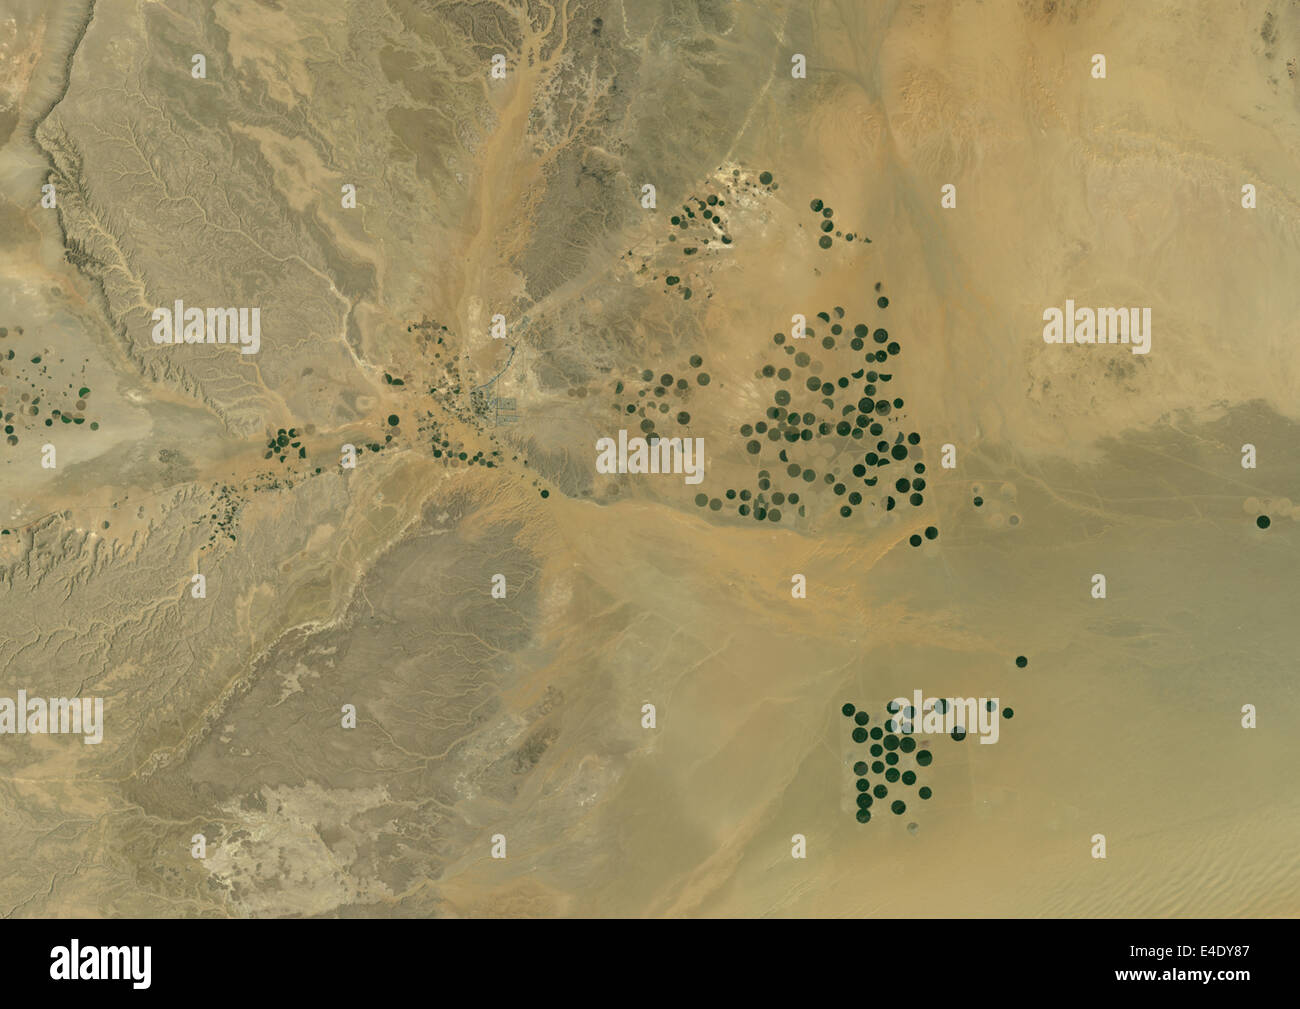 Agriculture In The Desert, Al Sulail, South Part Of The Riyadh Province, Saudi Arabia, True Colour Satellite Image. True colour Stock Photo